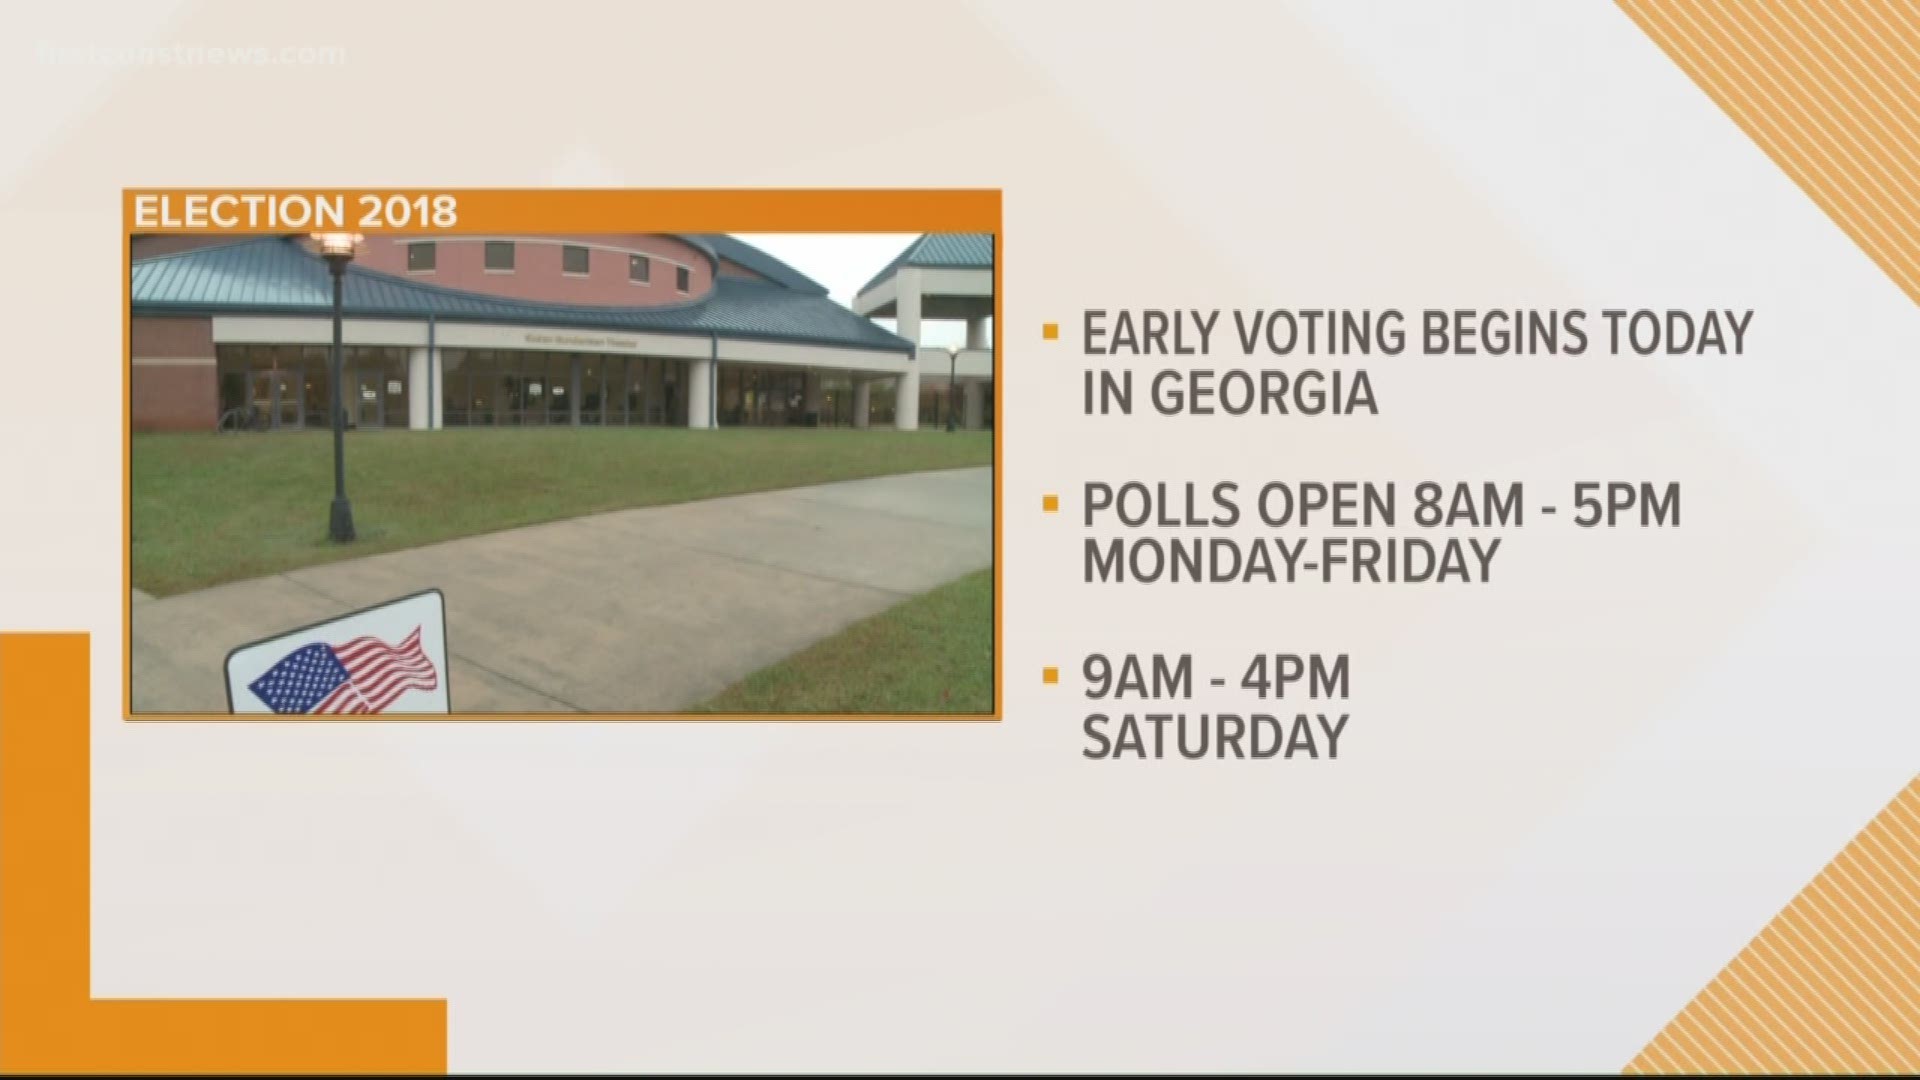 Polls will be open from 8 a.m. - 5 p.m. Monday - Friday until Nov. 2